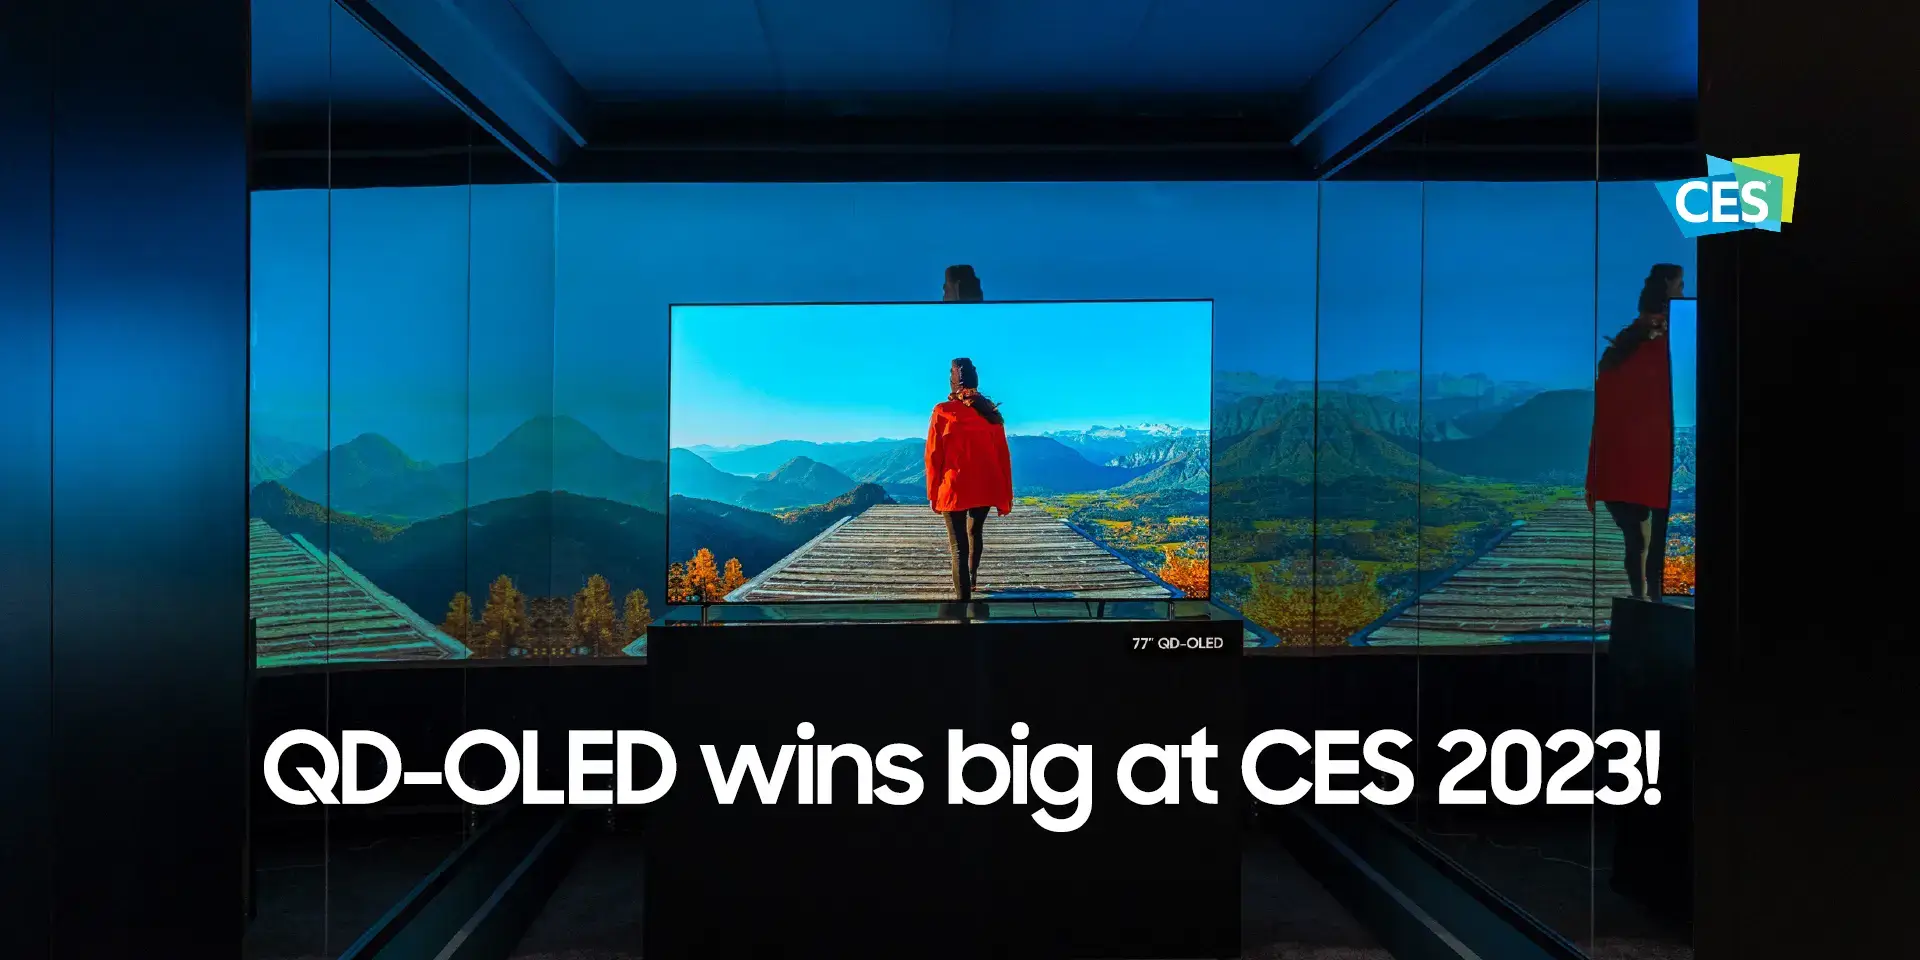 What Influencers Had to Say About QD-OLED at CES 2023